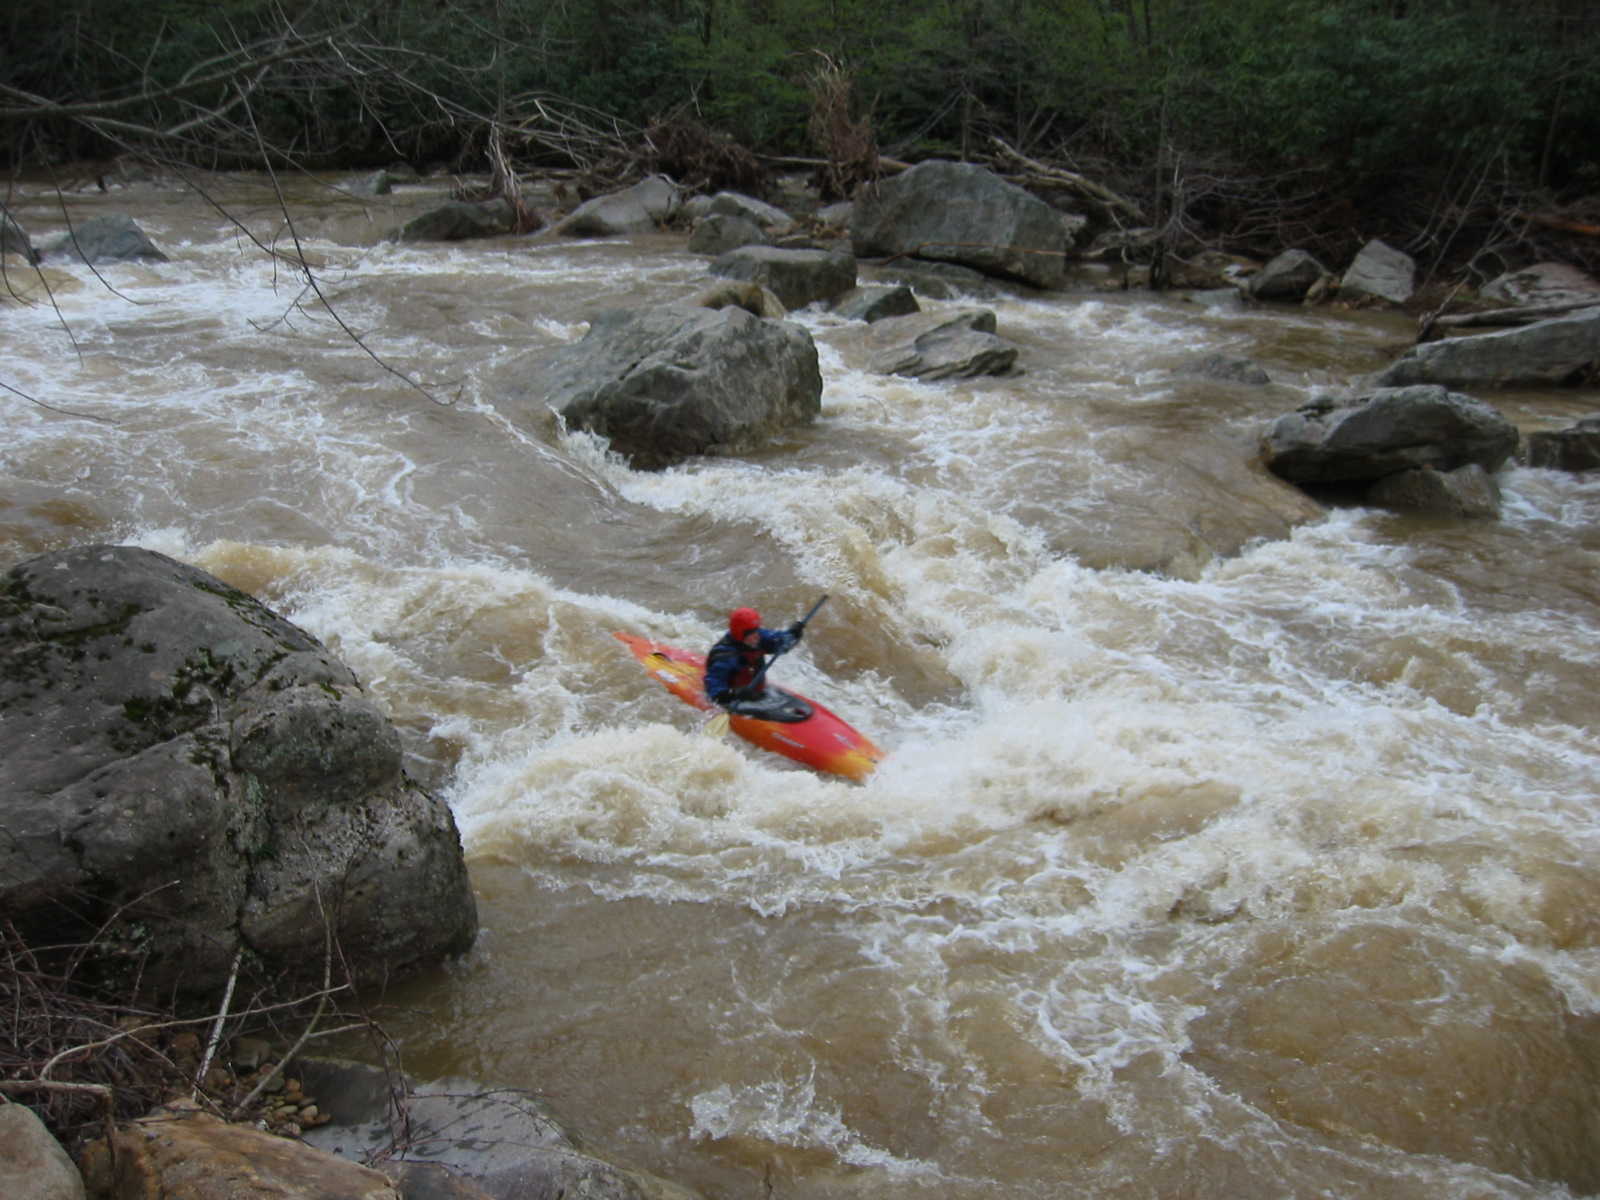 Bob Maxey hitting the main hole in the big South Fork rapid (Photo by Lou Campagna - 4/26/04)